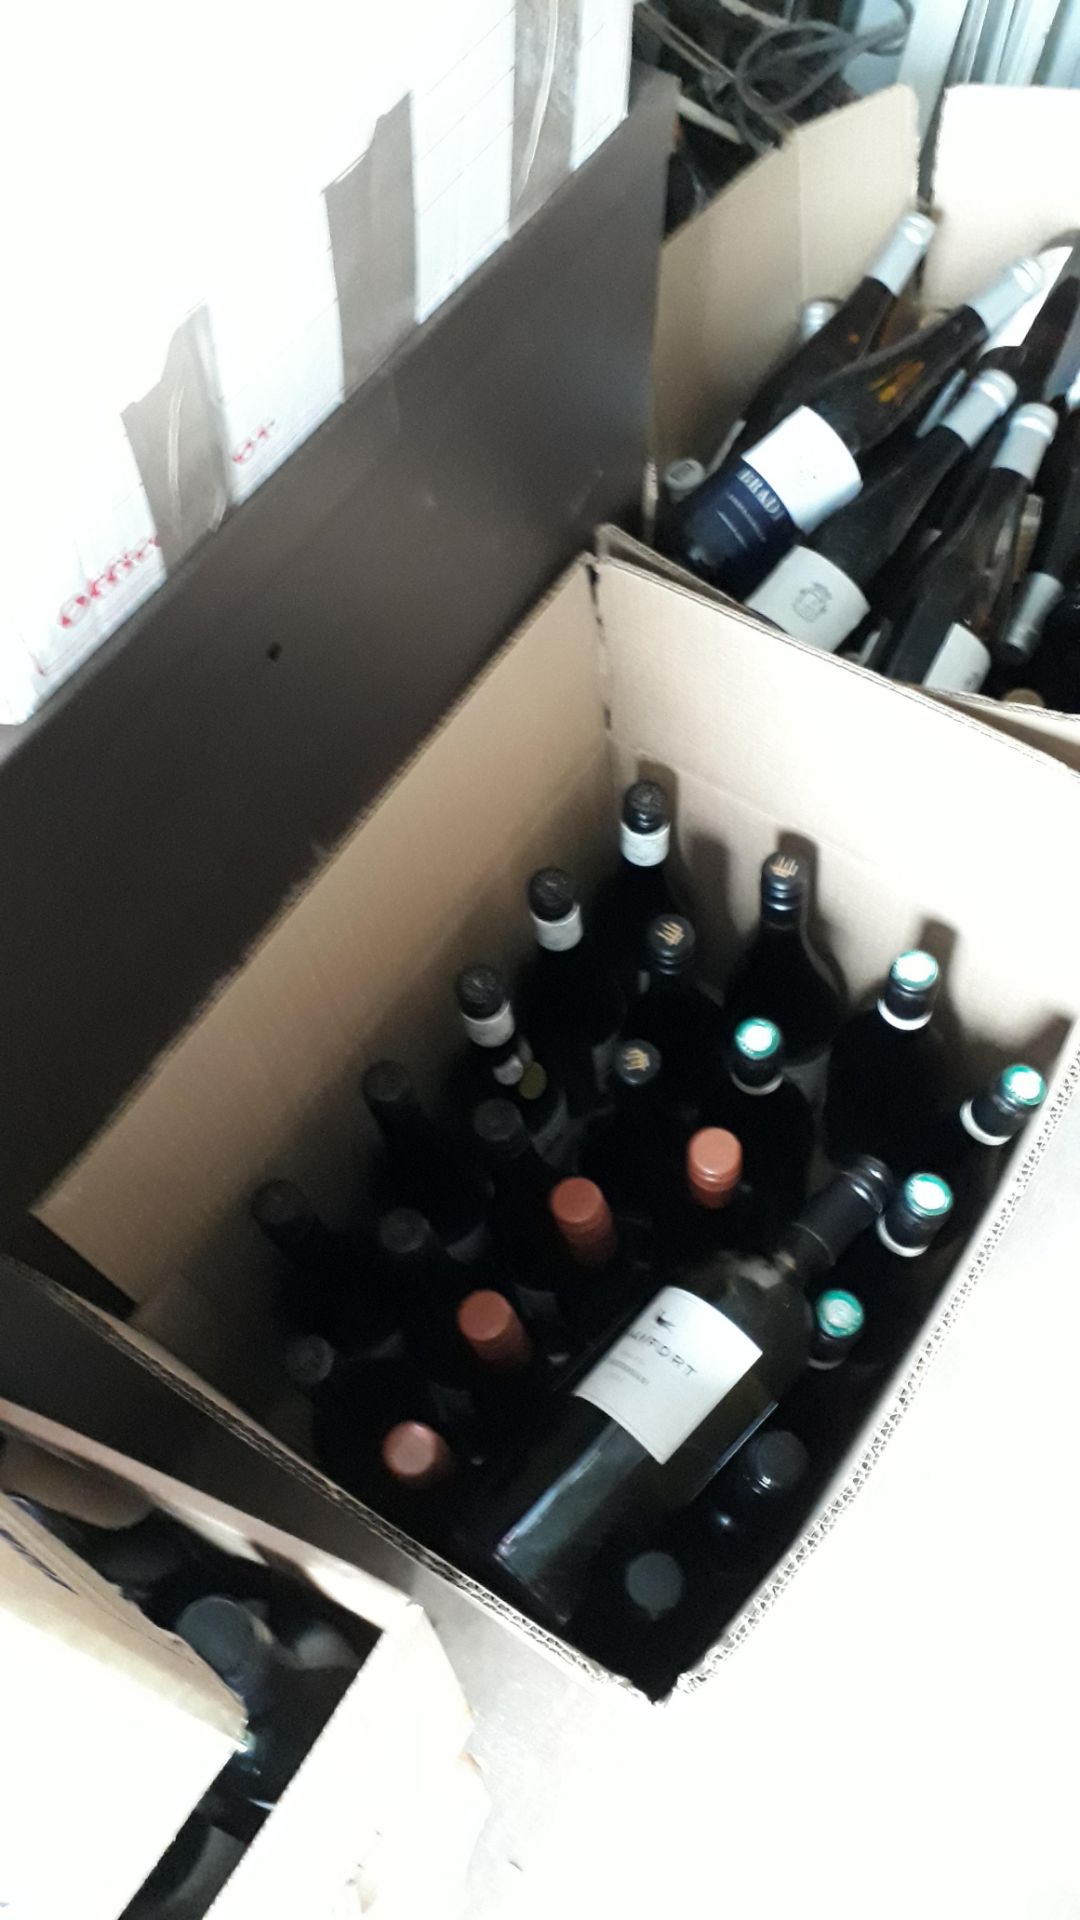 Large Quantity of Alcohol and Beverage Stock - Image 113 of 117